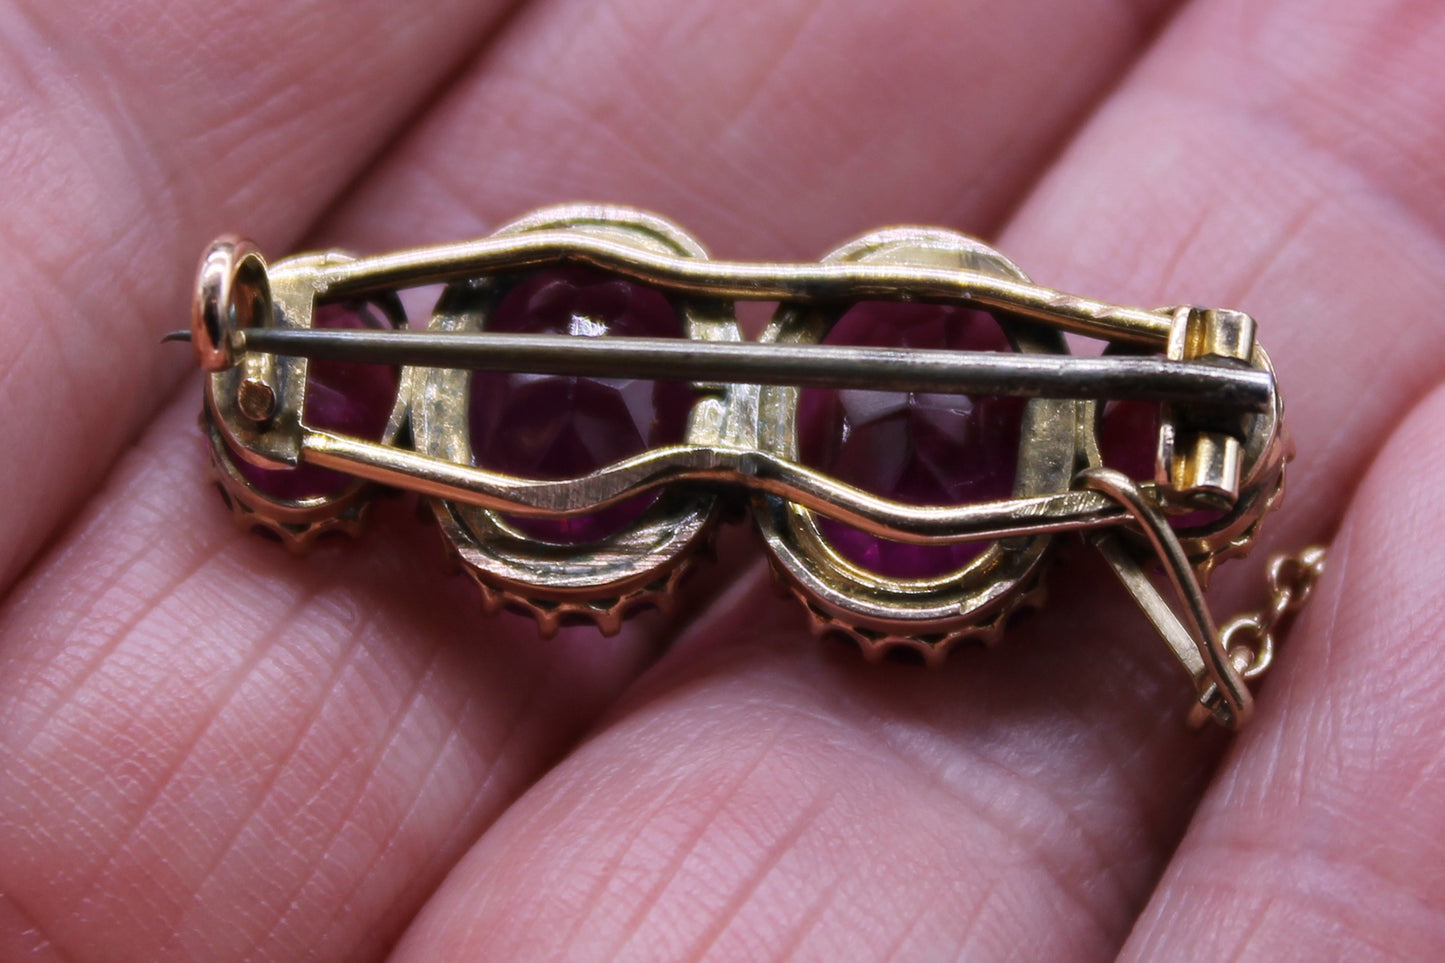 Antique Edwardian Gold Brooch with 4 Good sized Amethyst